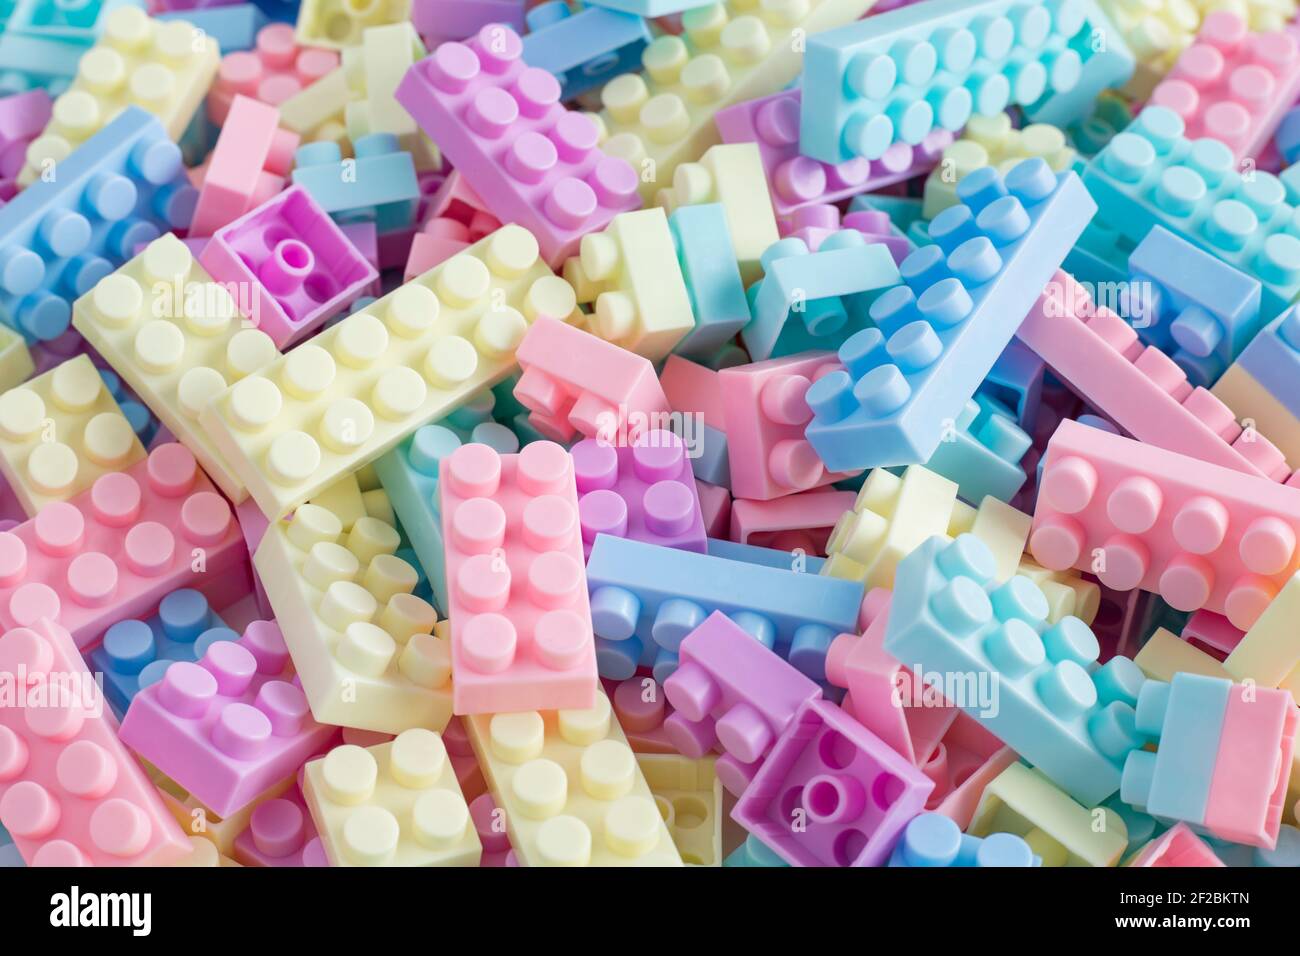 Pile of colorful plastic toy building blocks Stock Photo